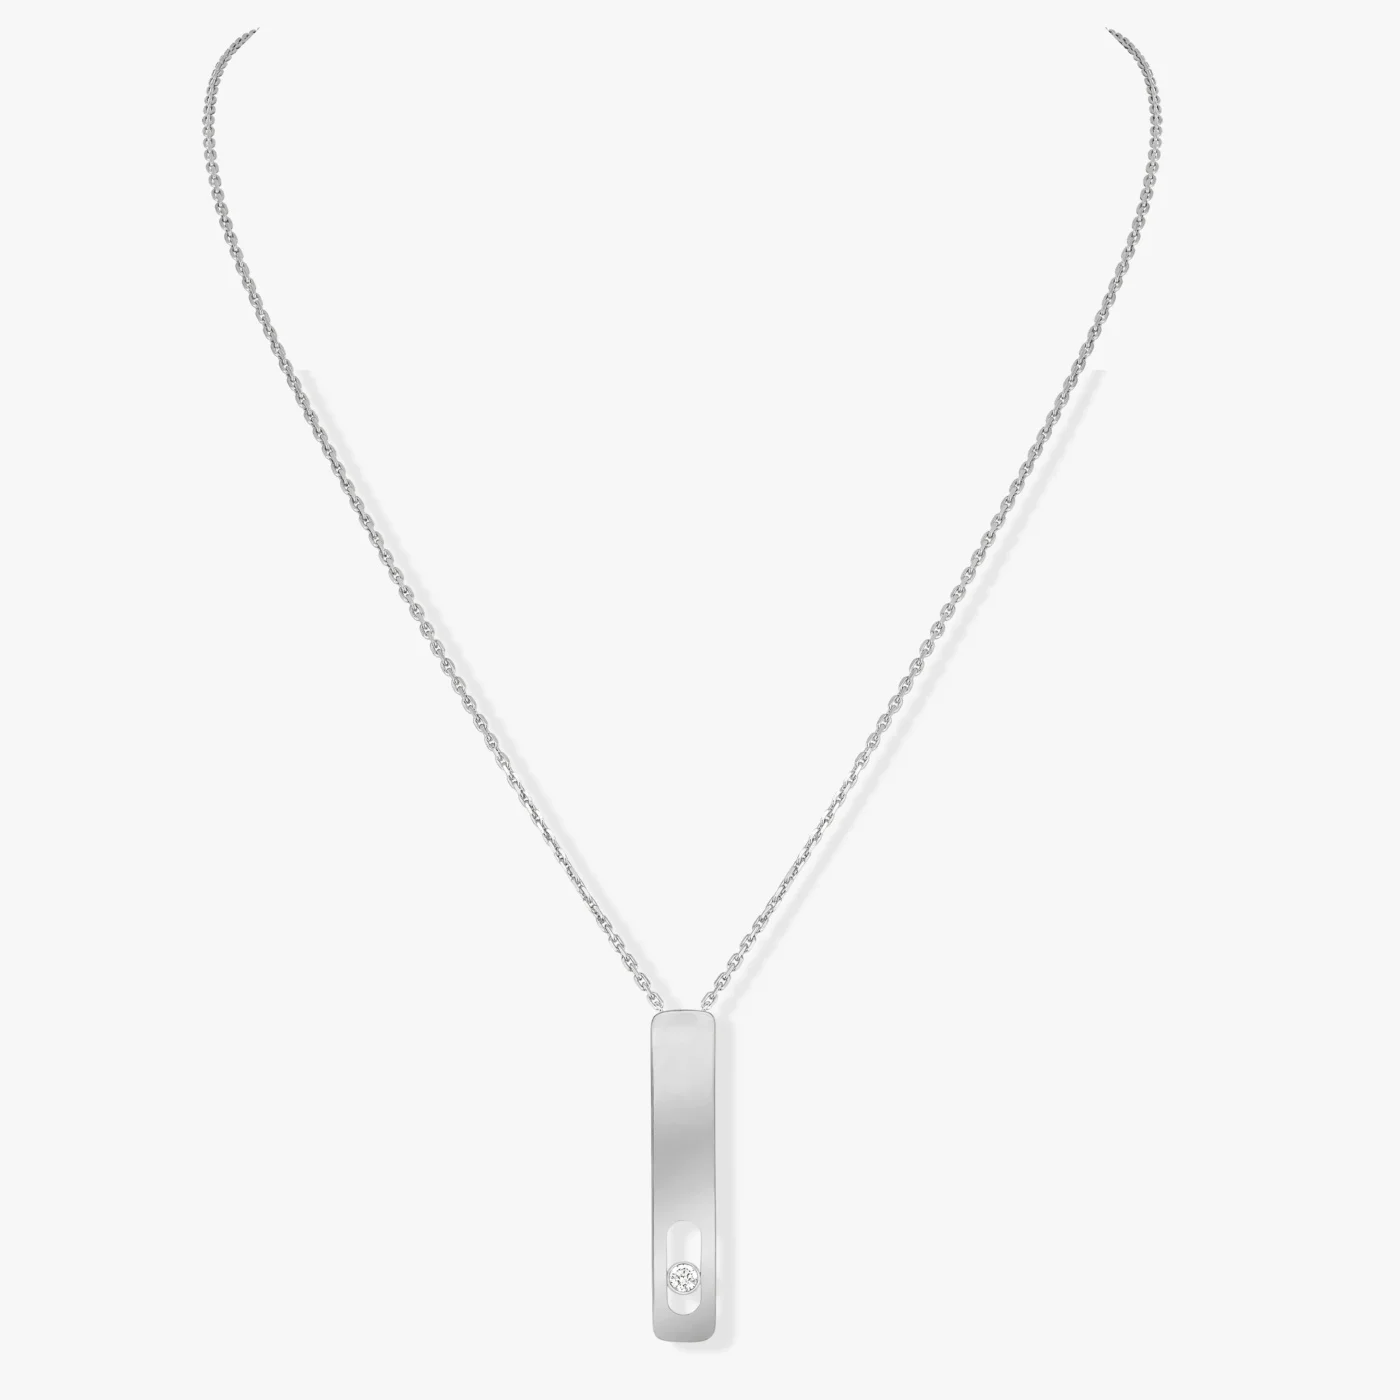 collier-diamant-or-blanc-my-first-gm-10039_1.jpg